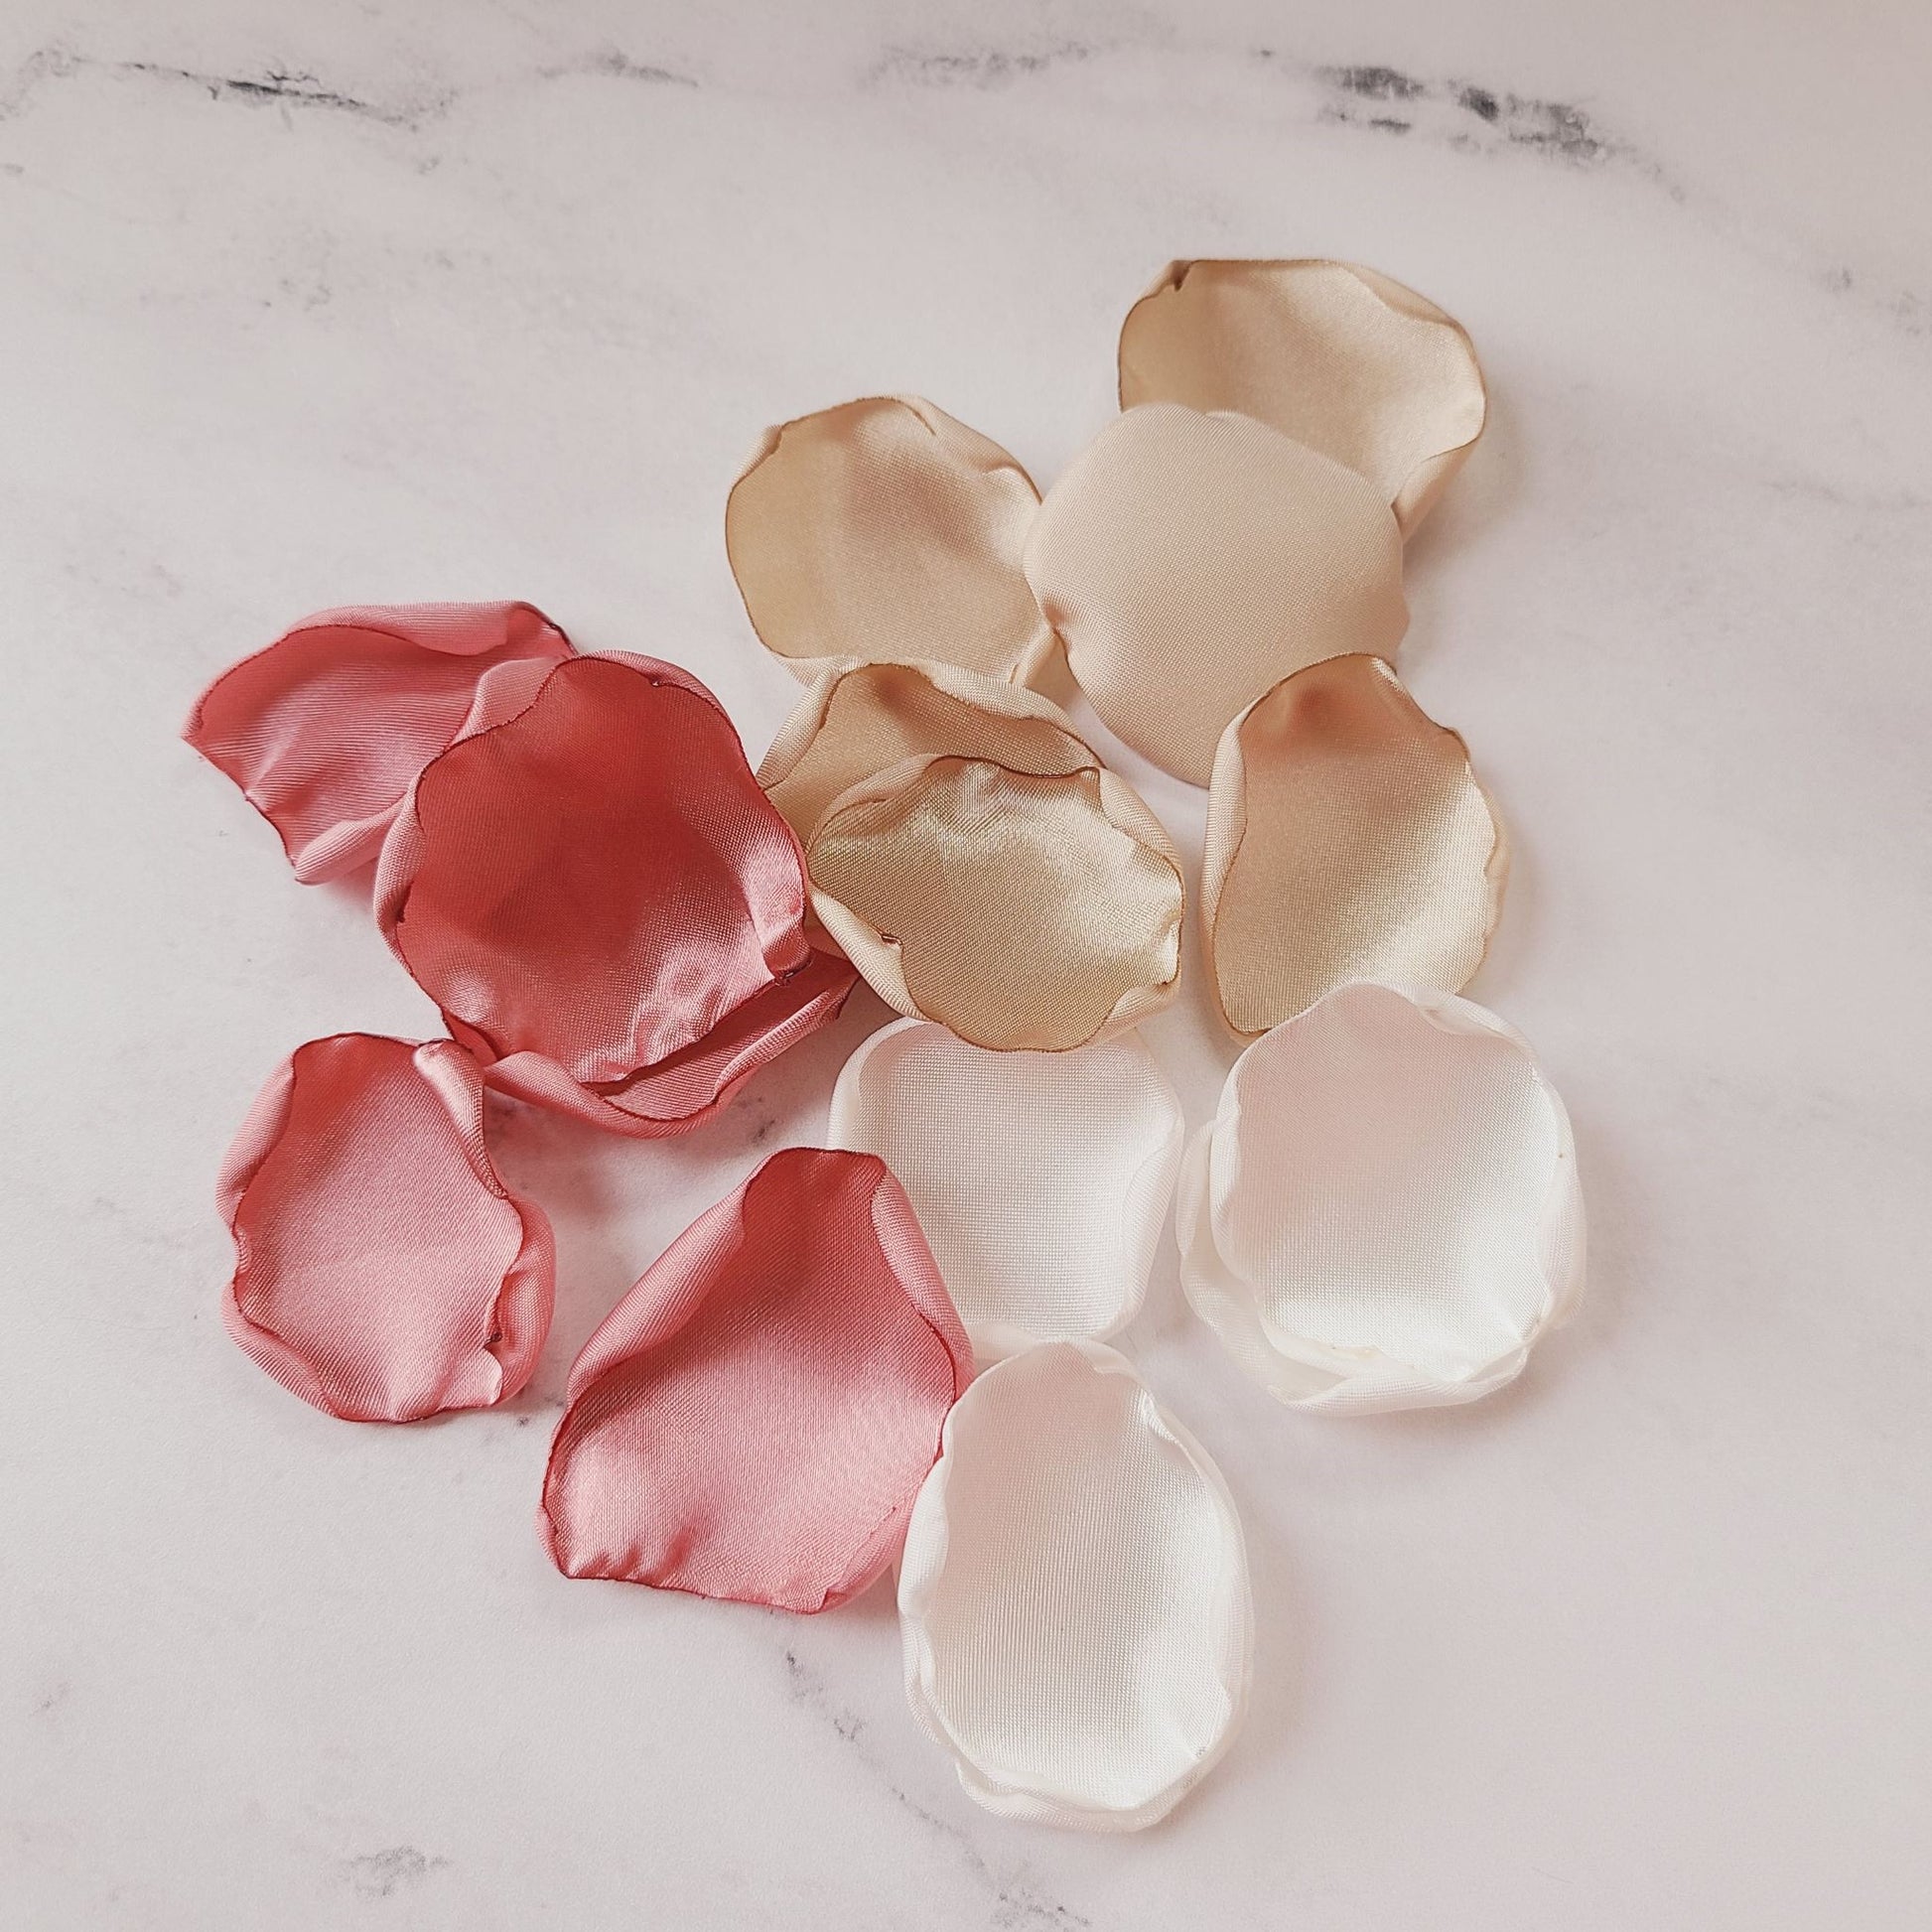 Champagne Blush Pink Artificial Rose Petals  Wedding Decorations 